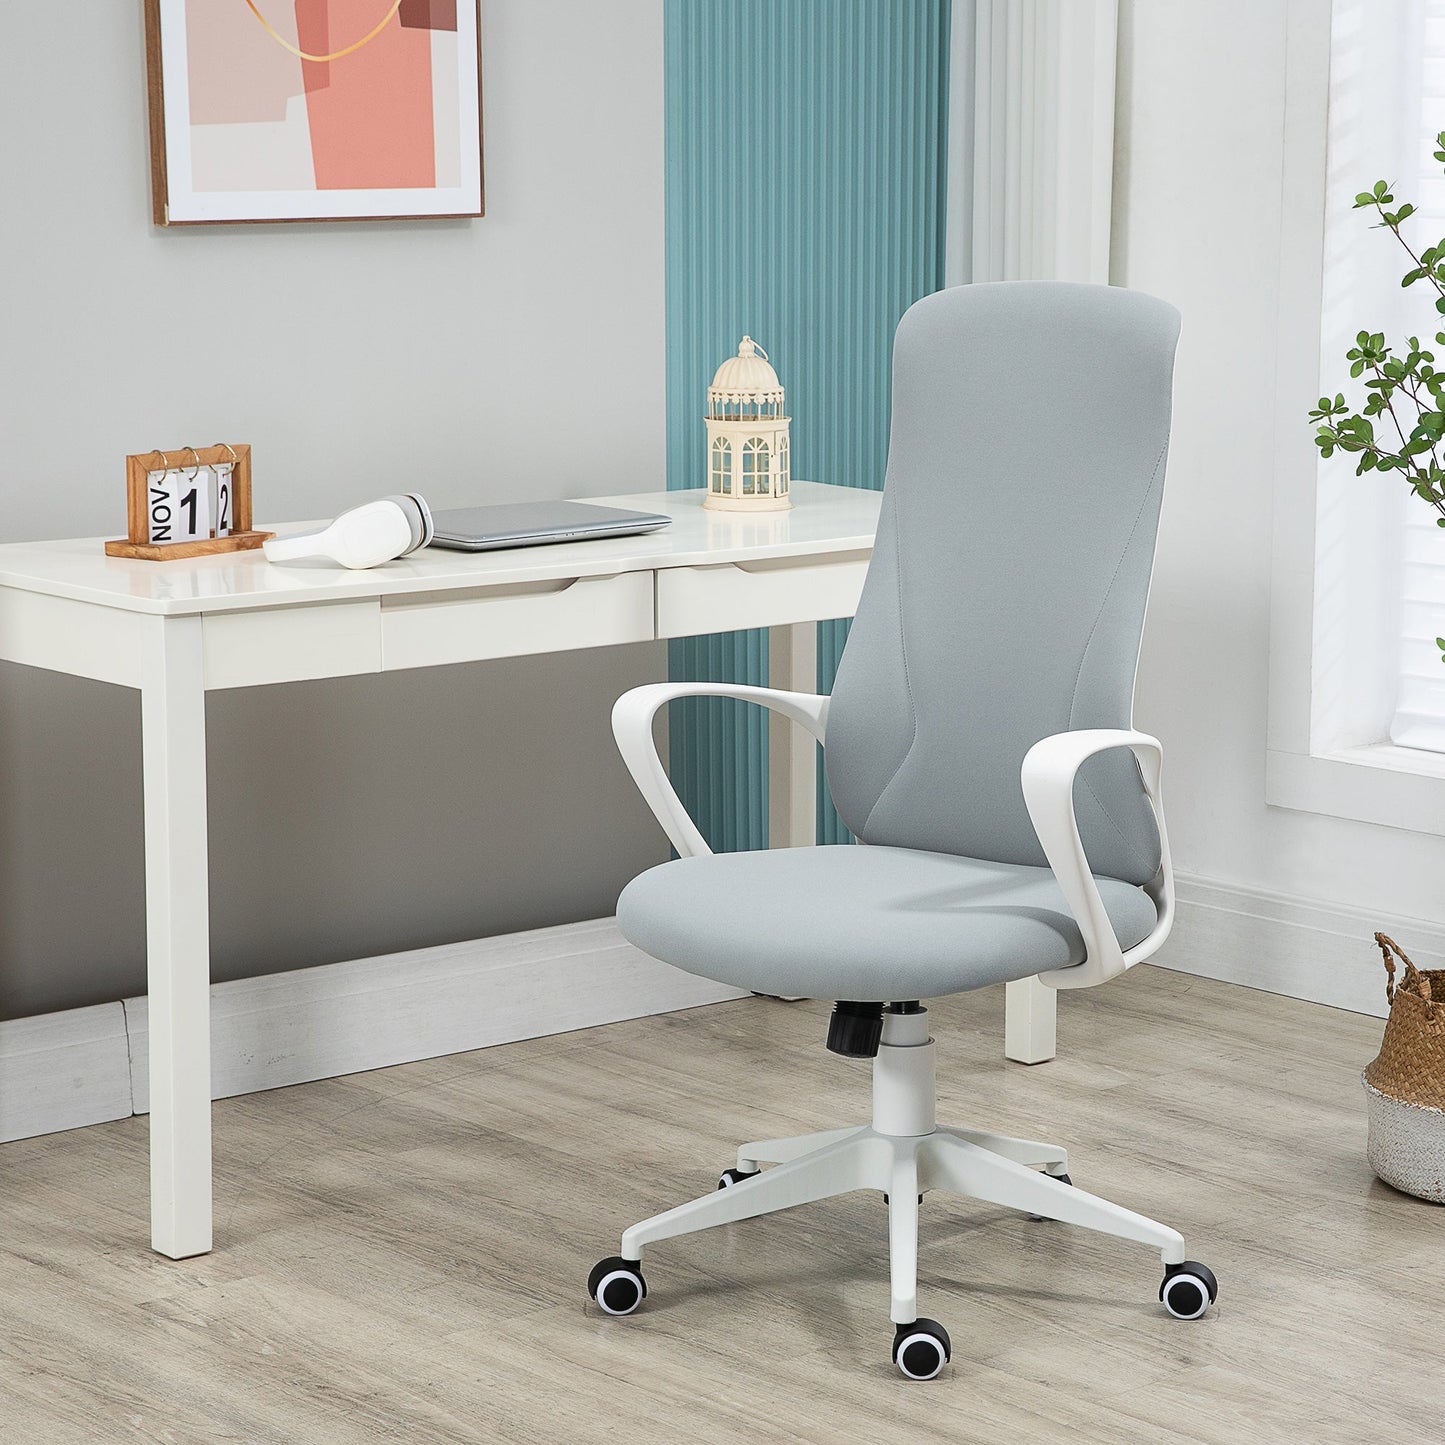 Ergonomic office chair winner with adjustable height and tilt function, 62x56x110-119.5 cm